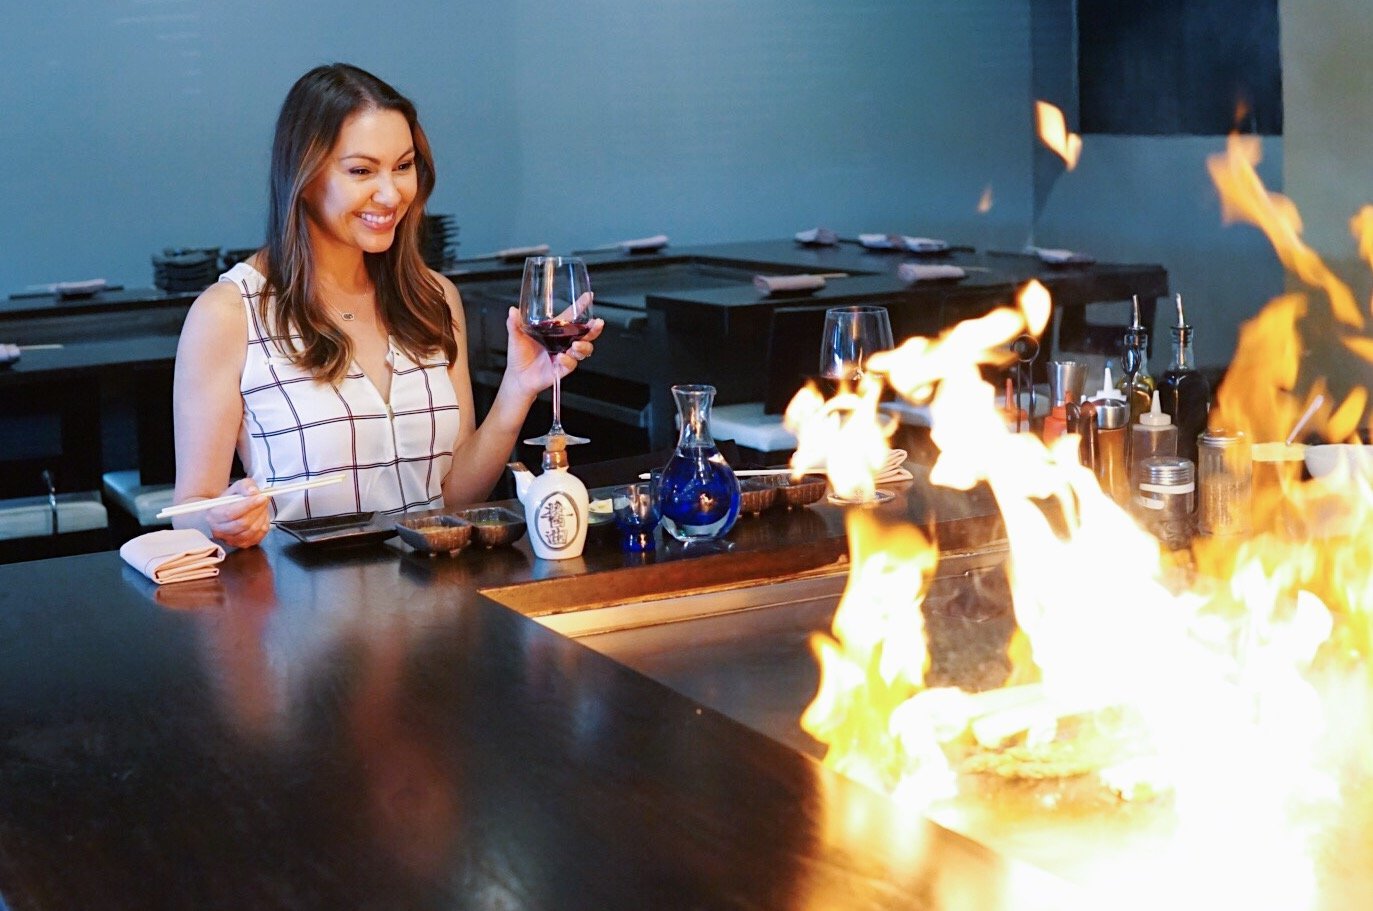 Move Over Benihana, There’s a New Teppanyaki Spot in Orange County and It’s On Fire!